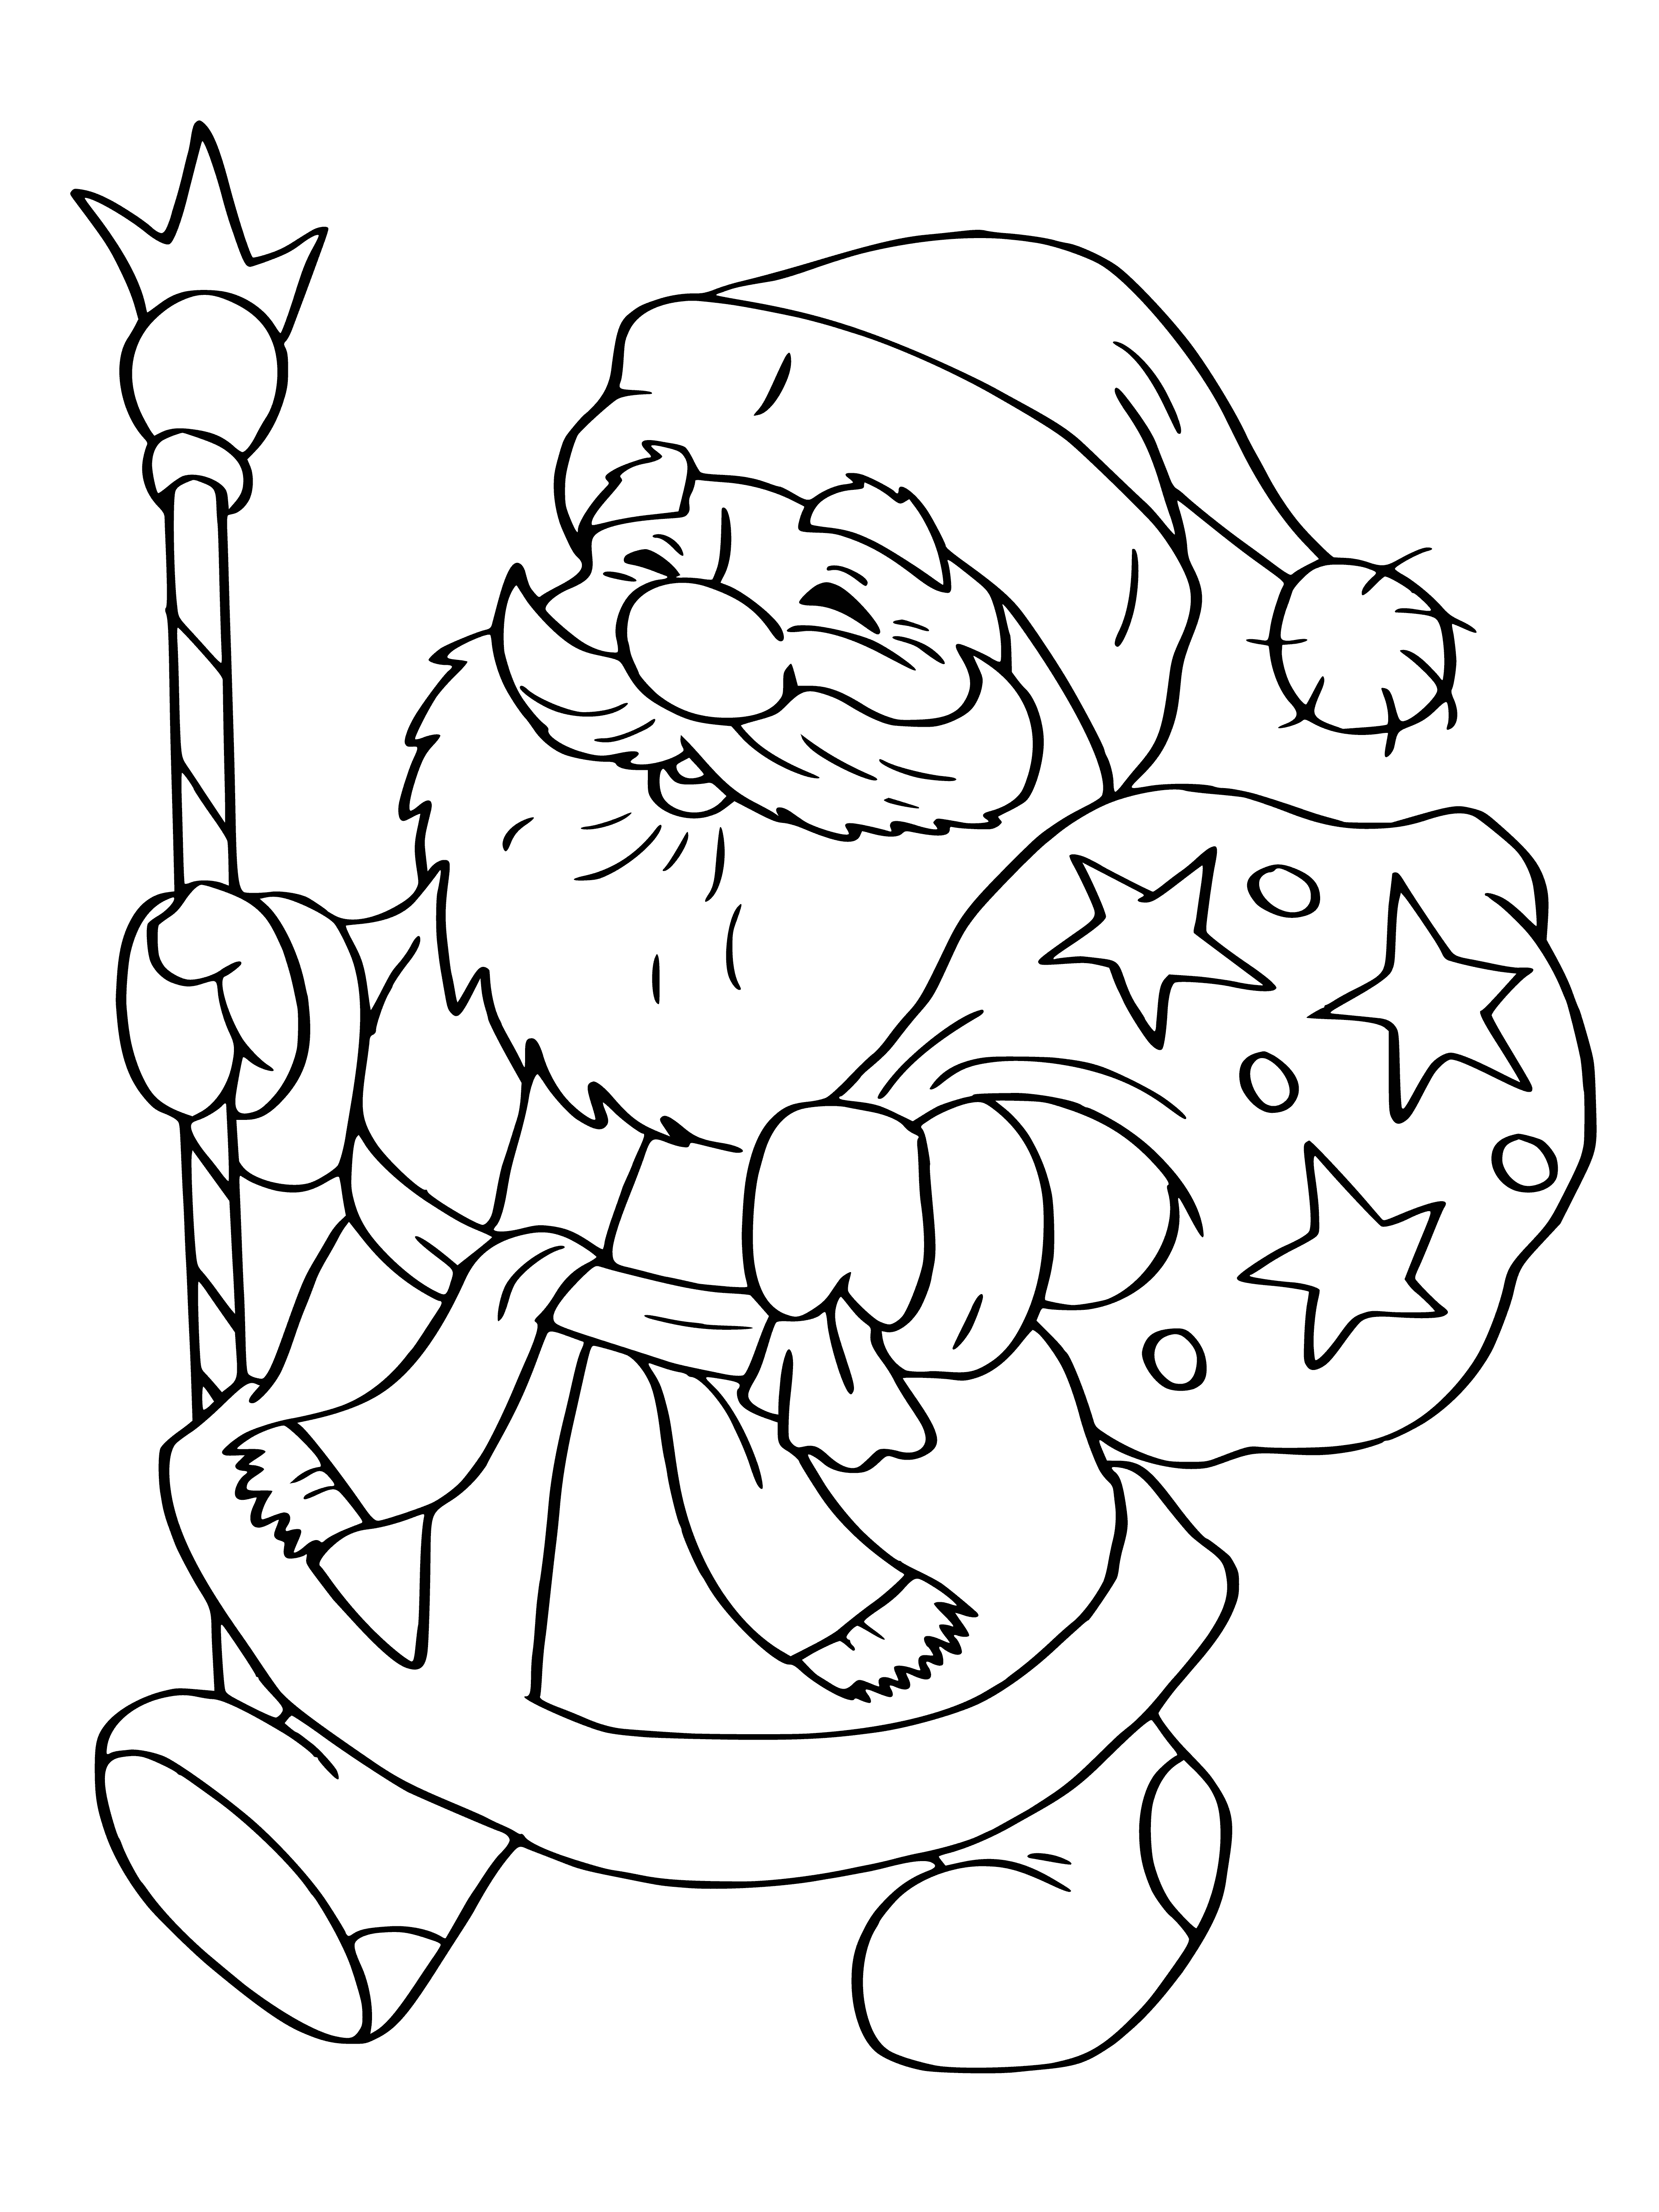 coloring page: Santa Claus with a bag of gifts, wearing a red suit with white fur trim, in front of a fireplace with Christmas tree. #ChristmasSpirit